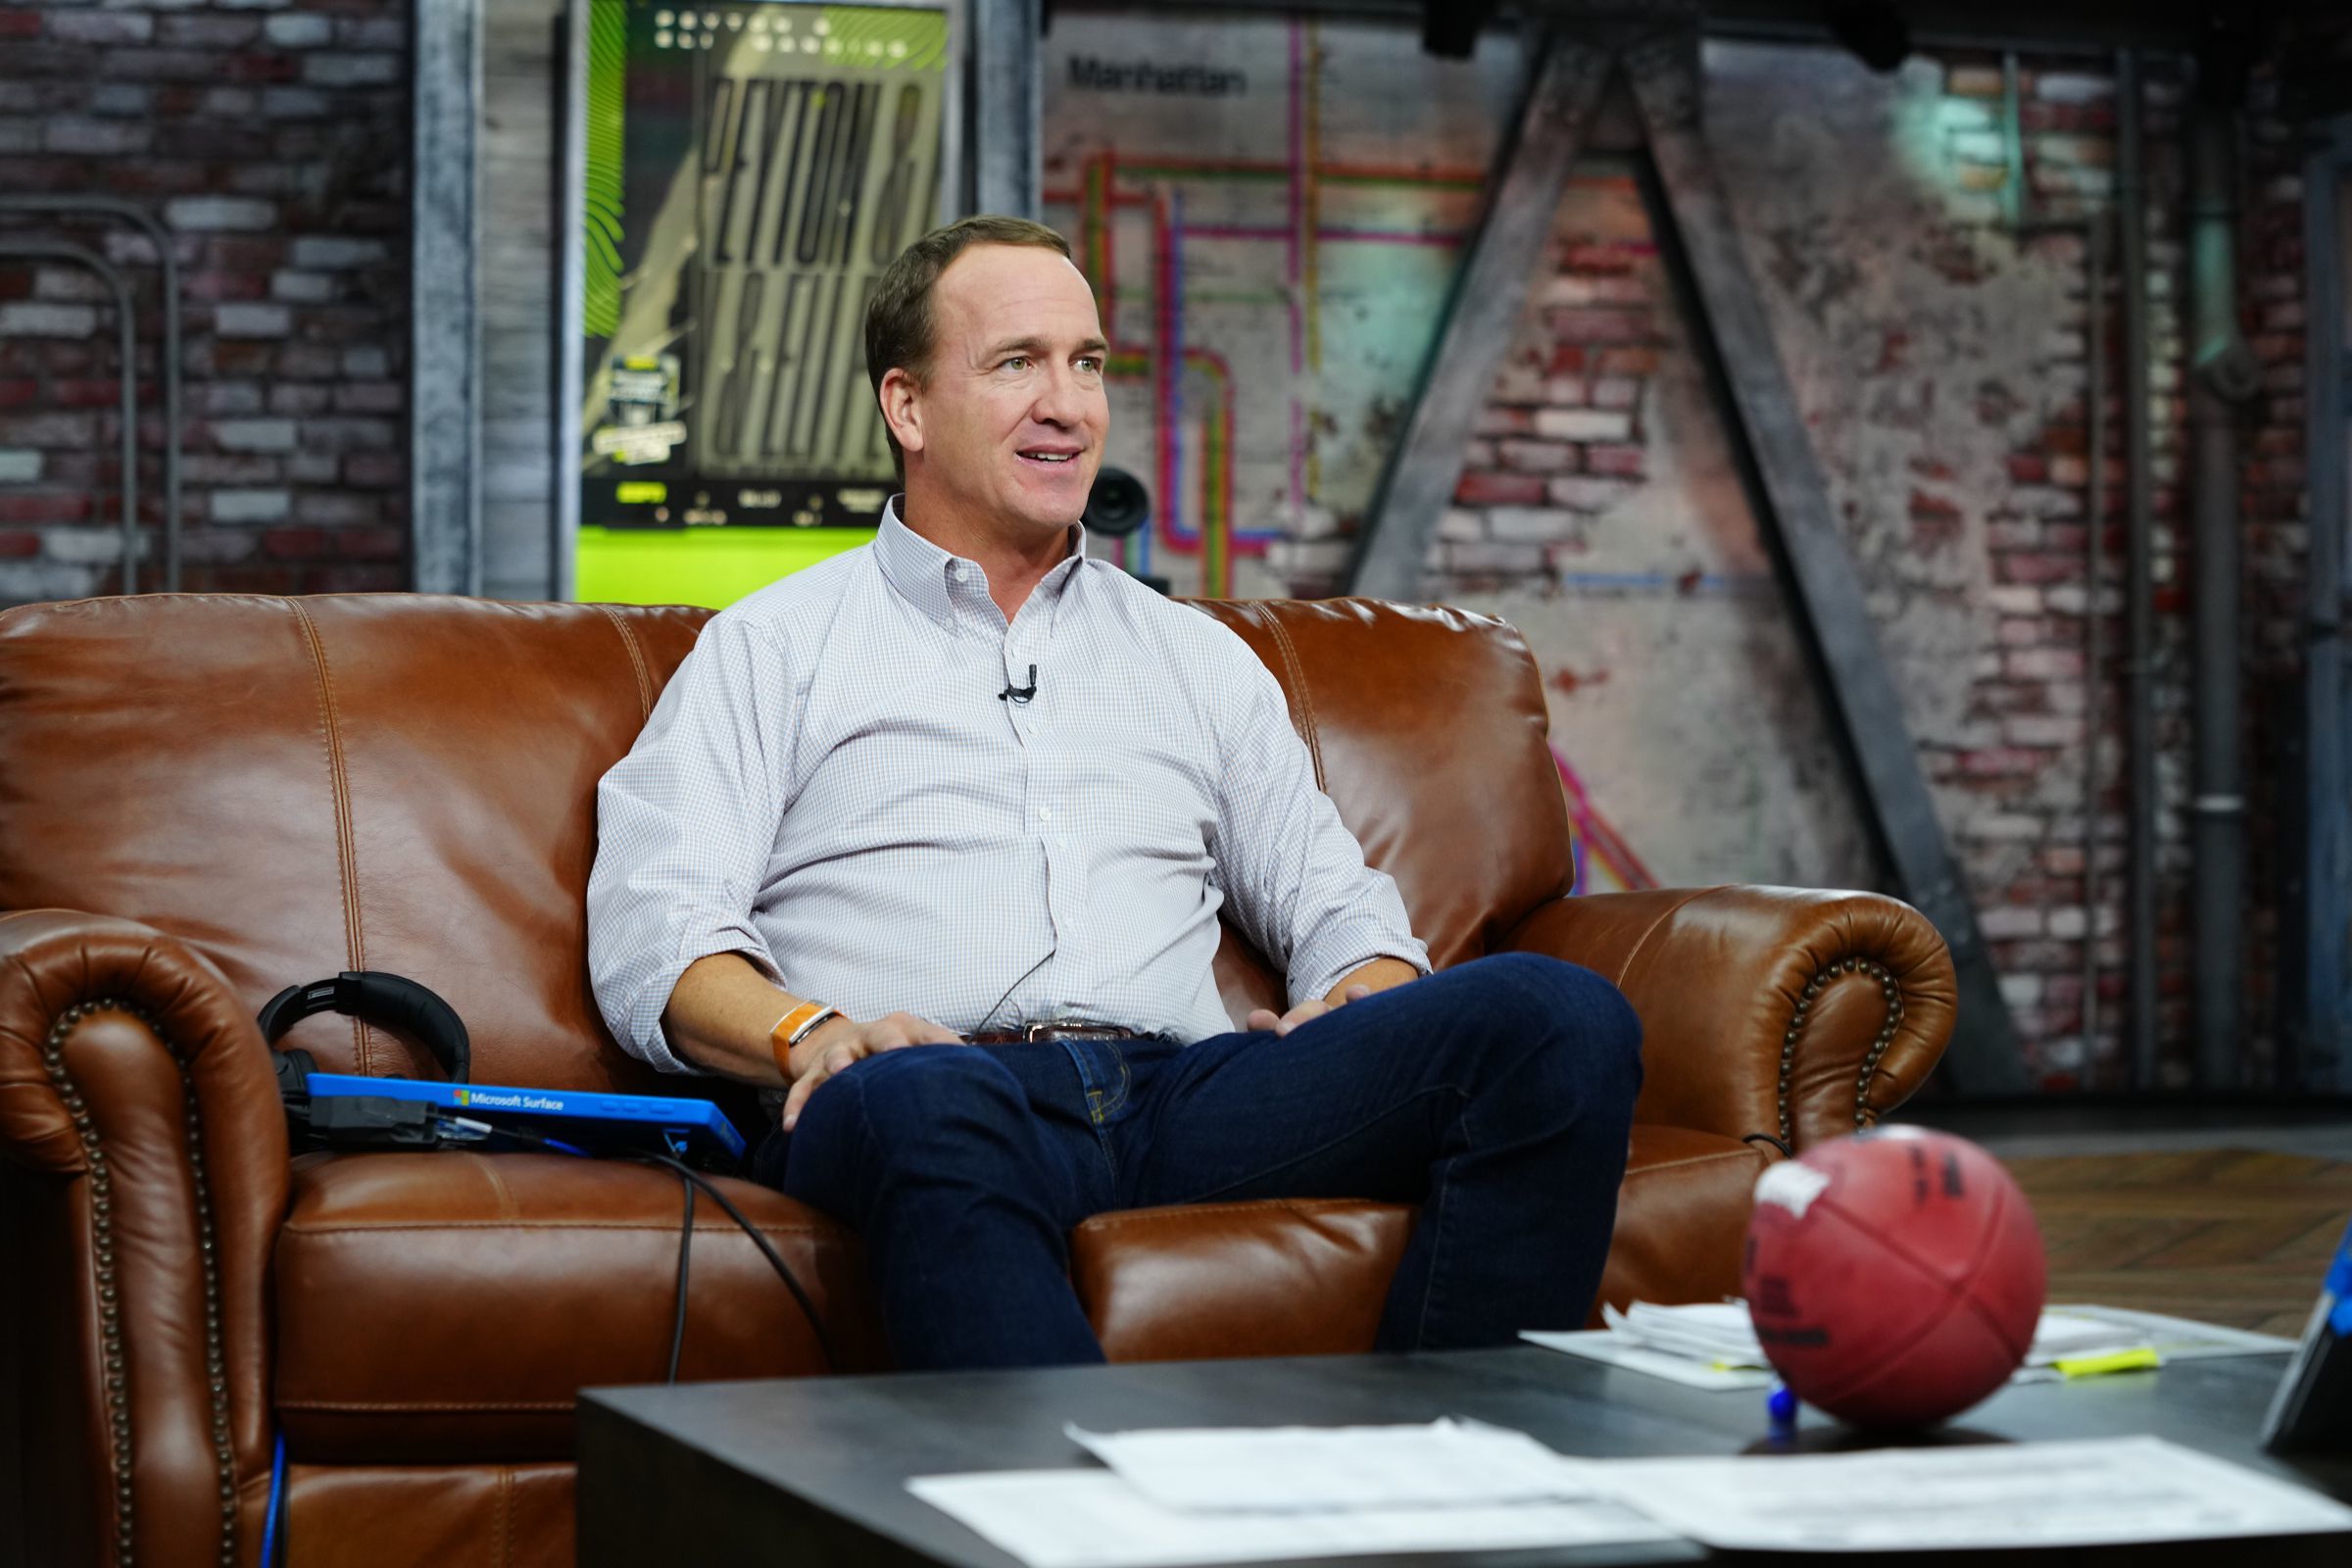 Monday Night Football' with Eli and Peyton Manning: Play